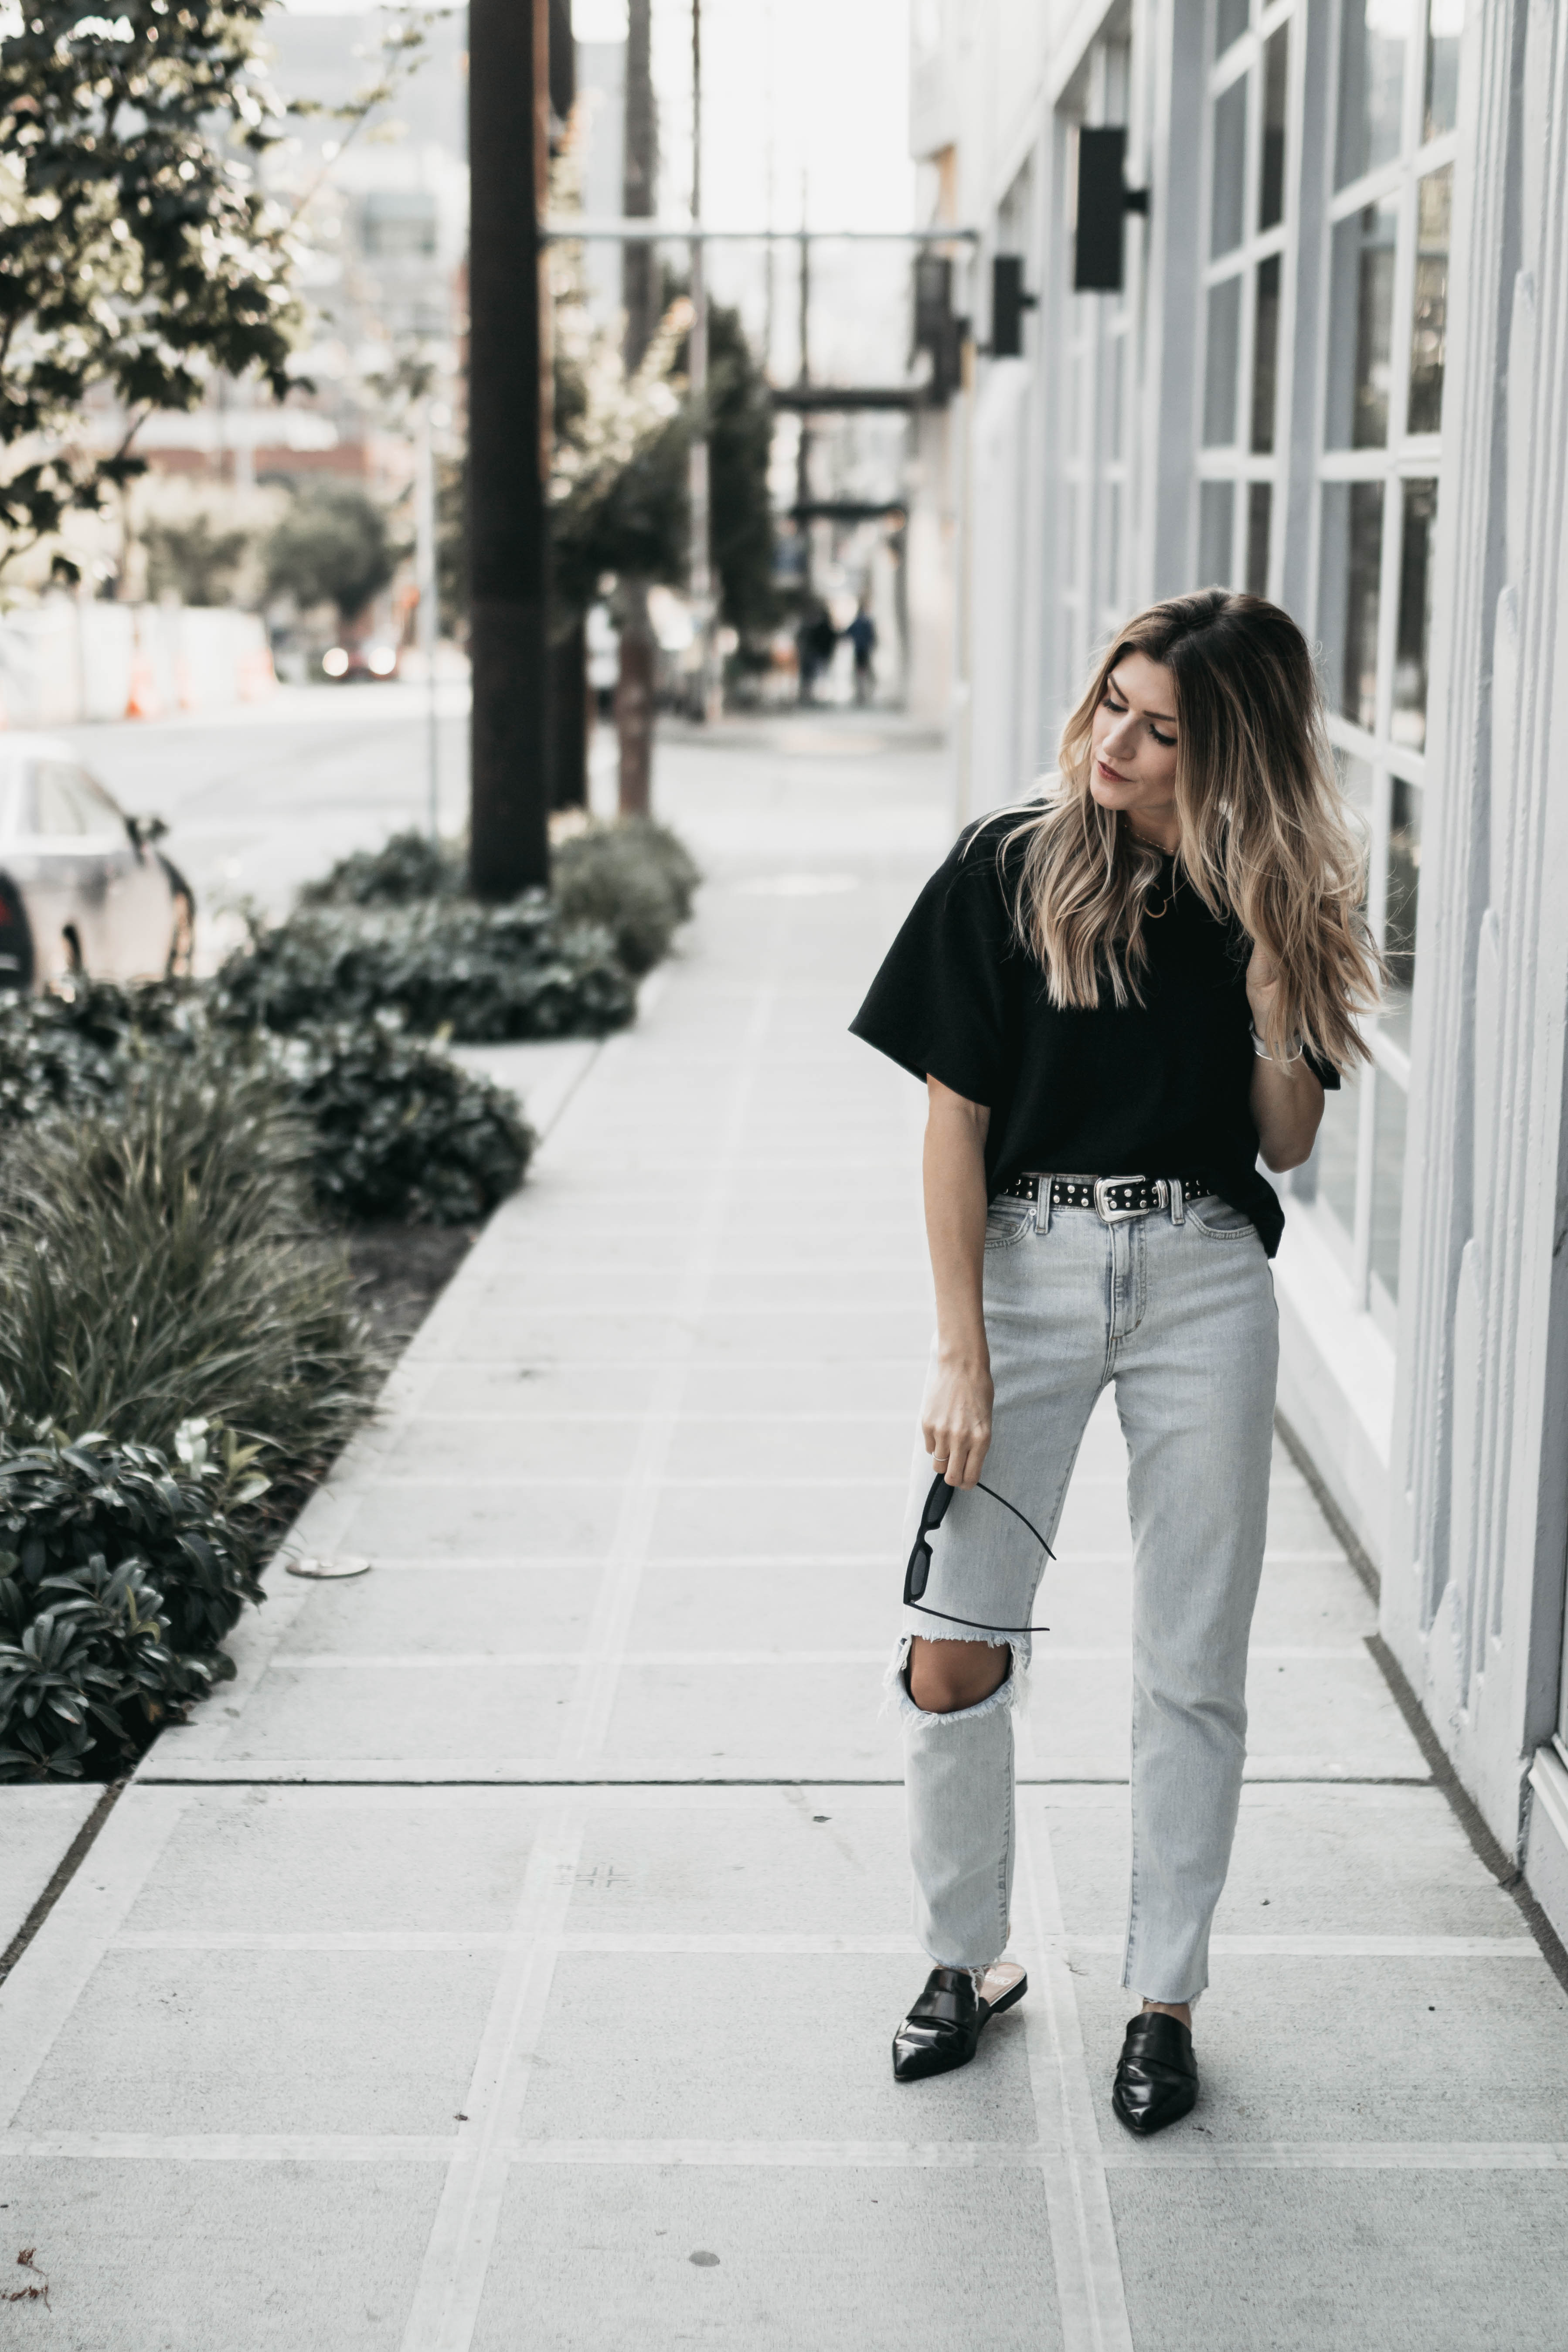 The Grey Edit - South Lake Union - T Shirt and Jeans - Life Edit